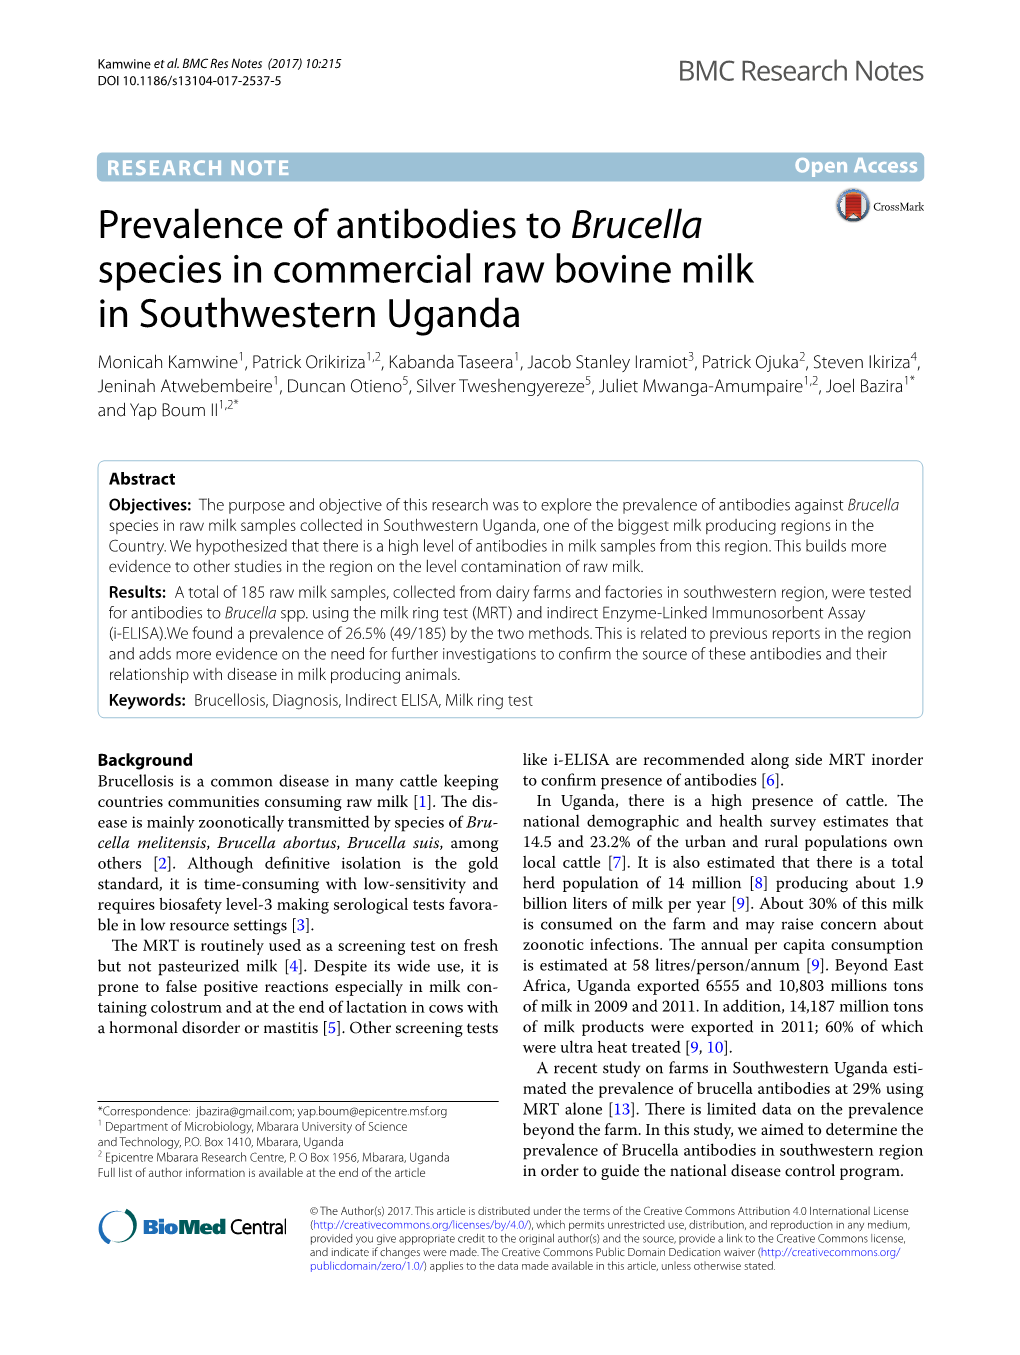 Prevalence of Antibodies to Brucella Species in Commercial Raw Bovine